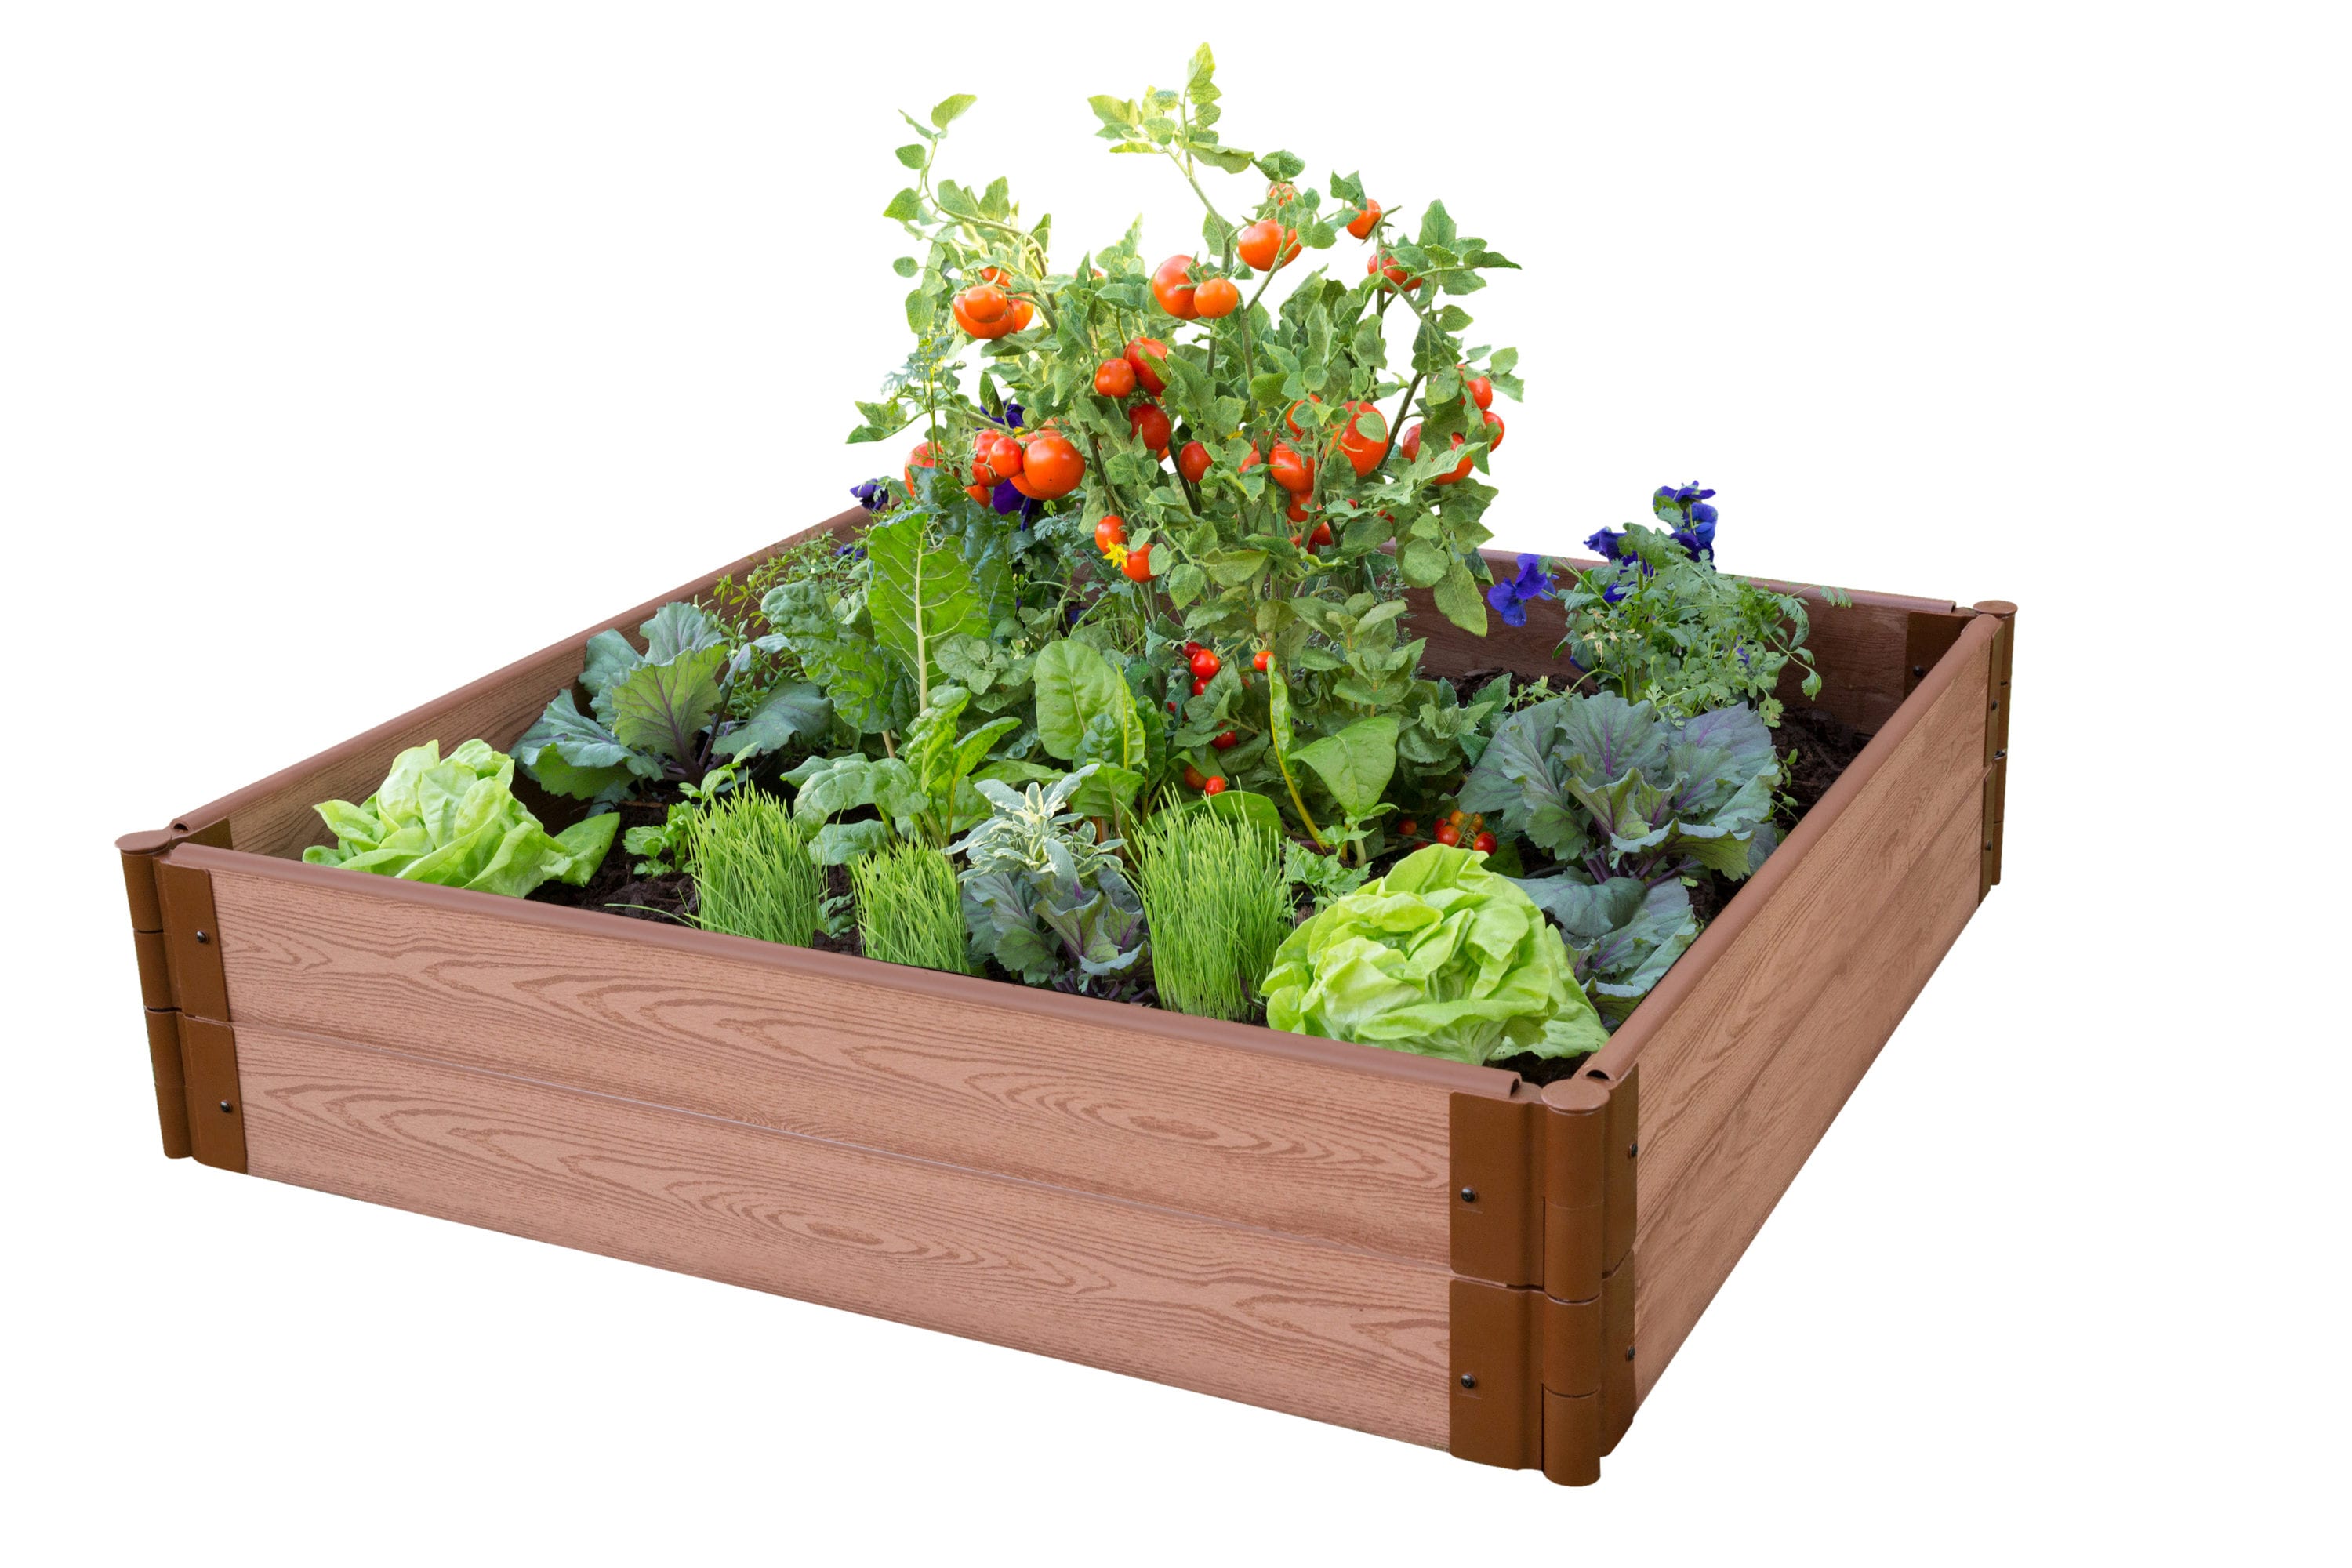 Image of Combination Raised Garden Box lowes